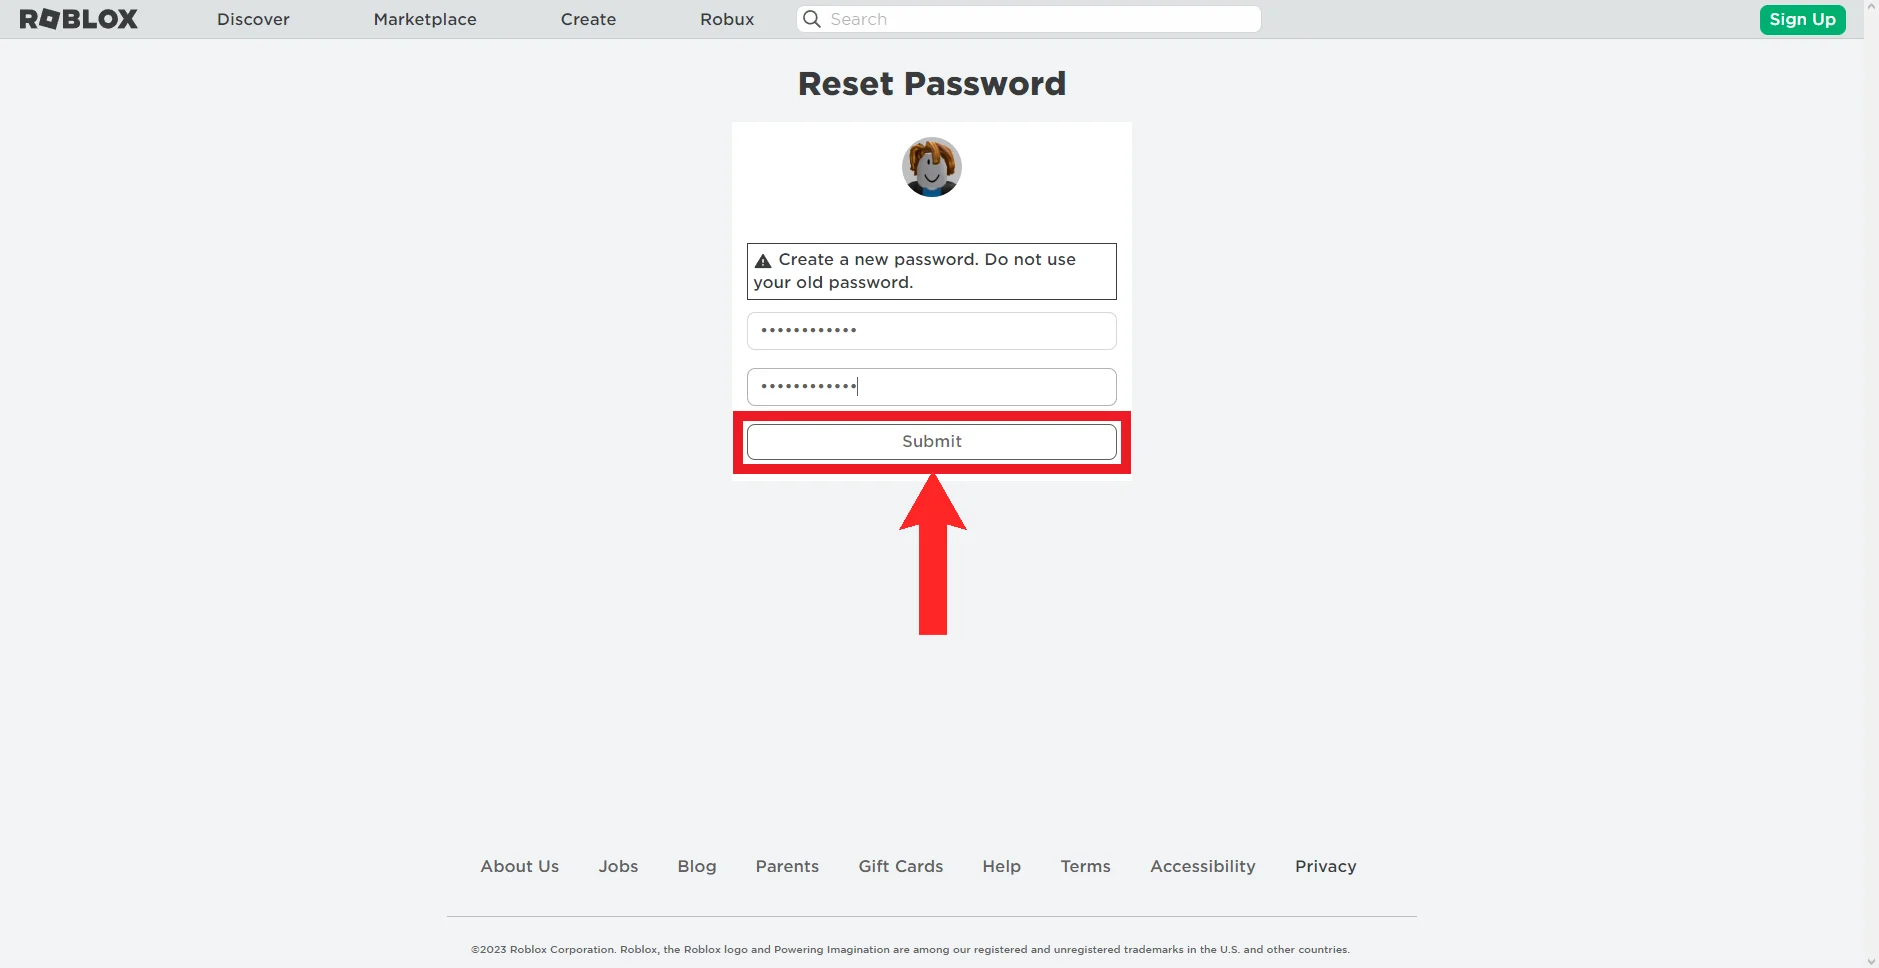 How To Reset Your Roblox Password in 8 Easy Steps [Guide]